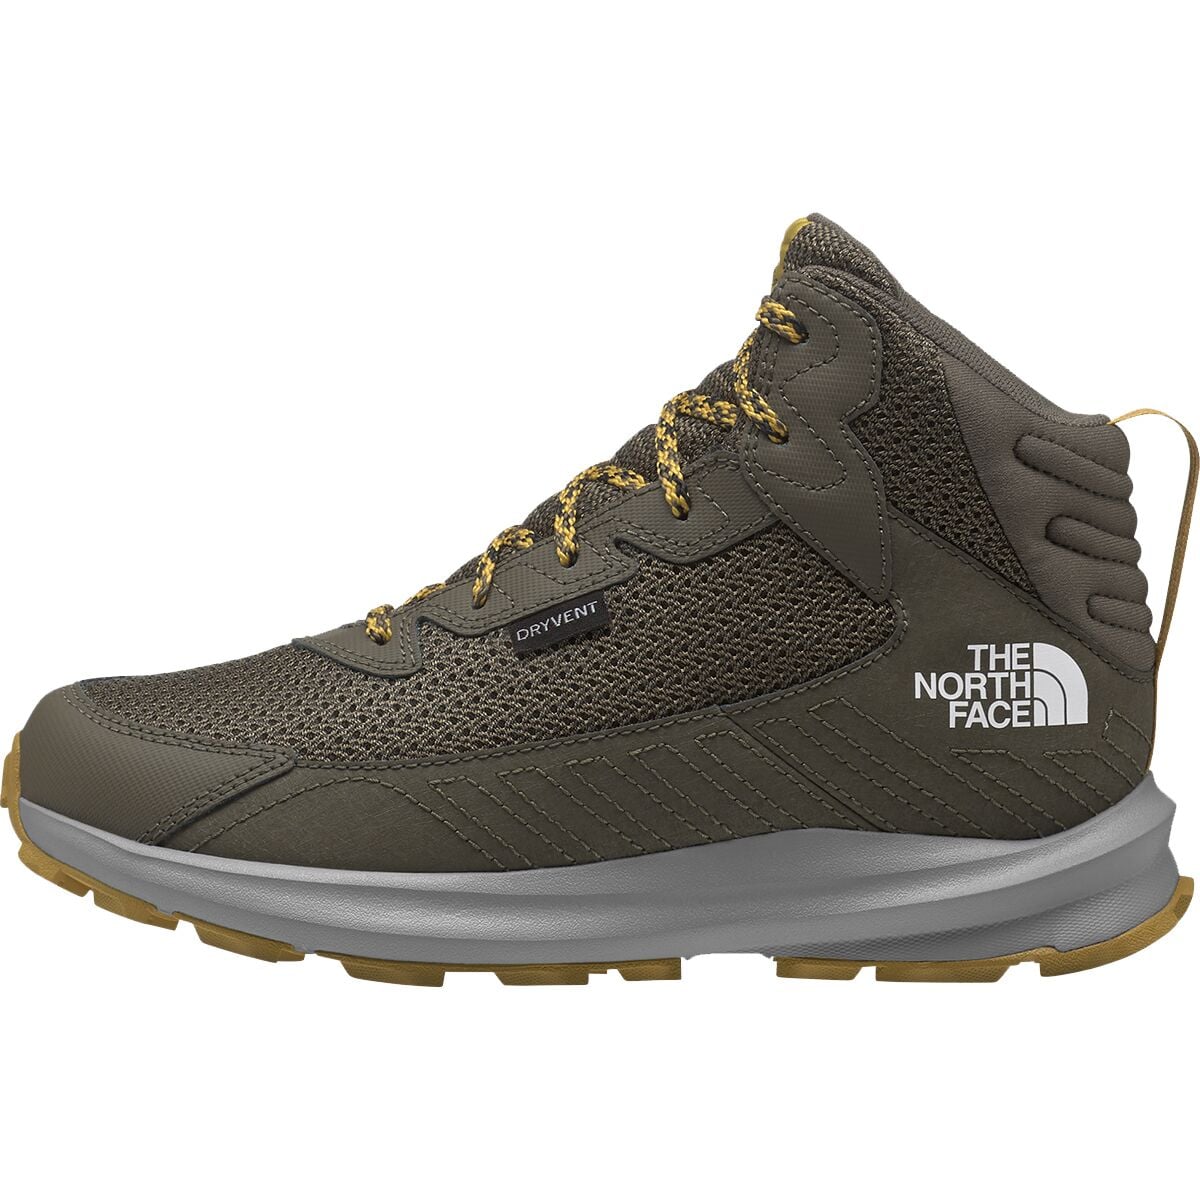 The North Face Fastpack Mid Waterproof Hiking Boot - Kids'